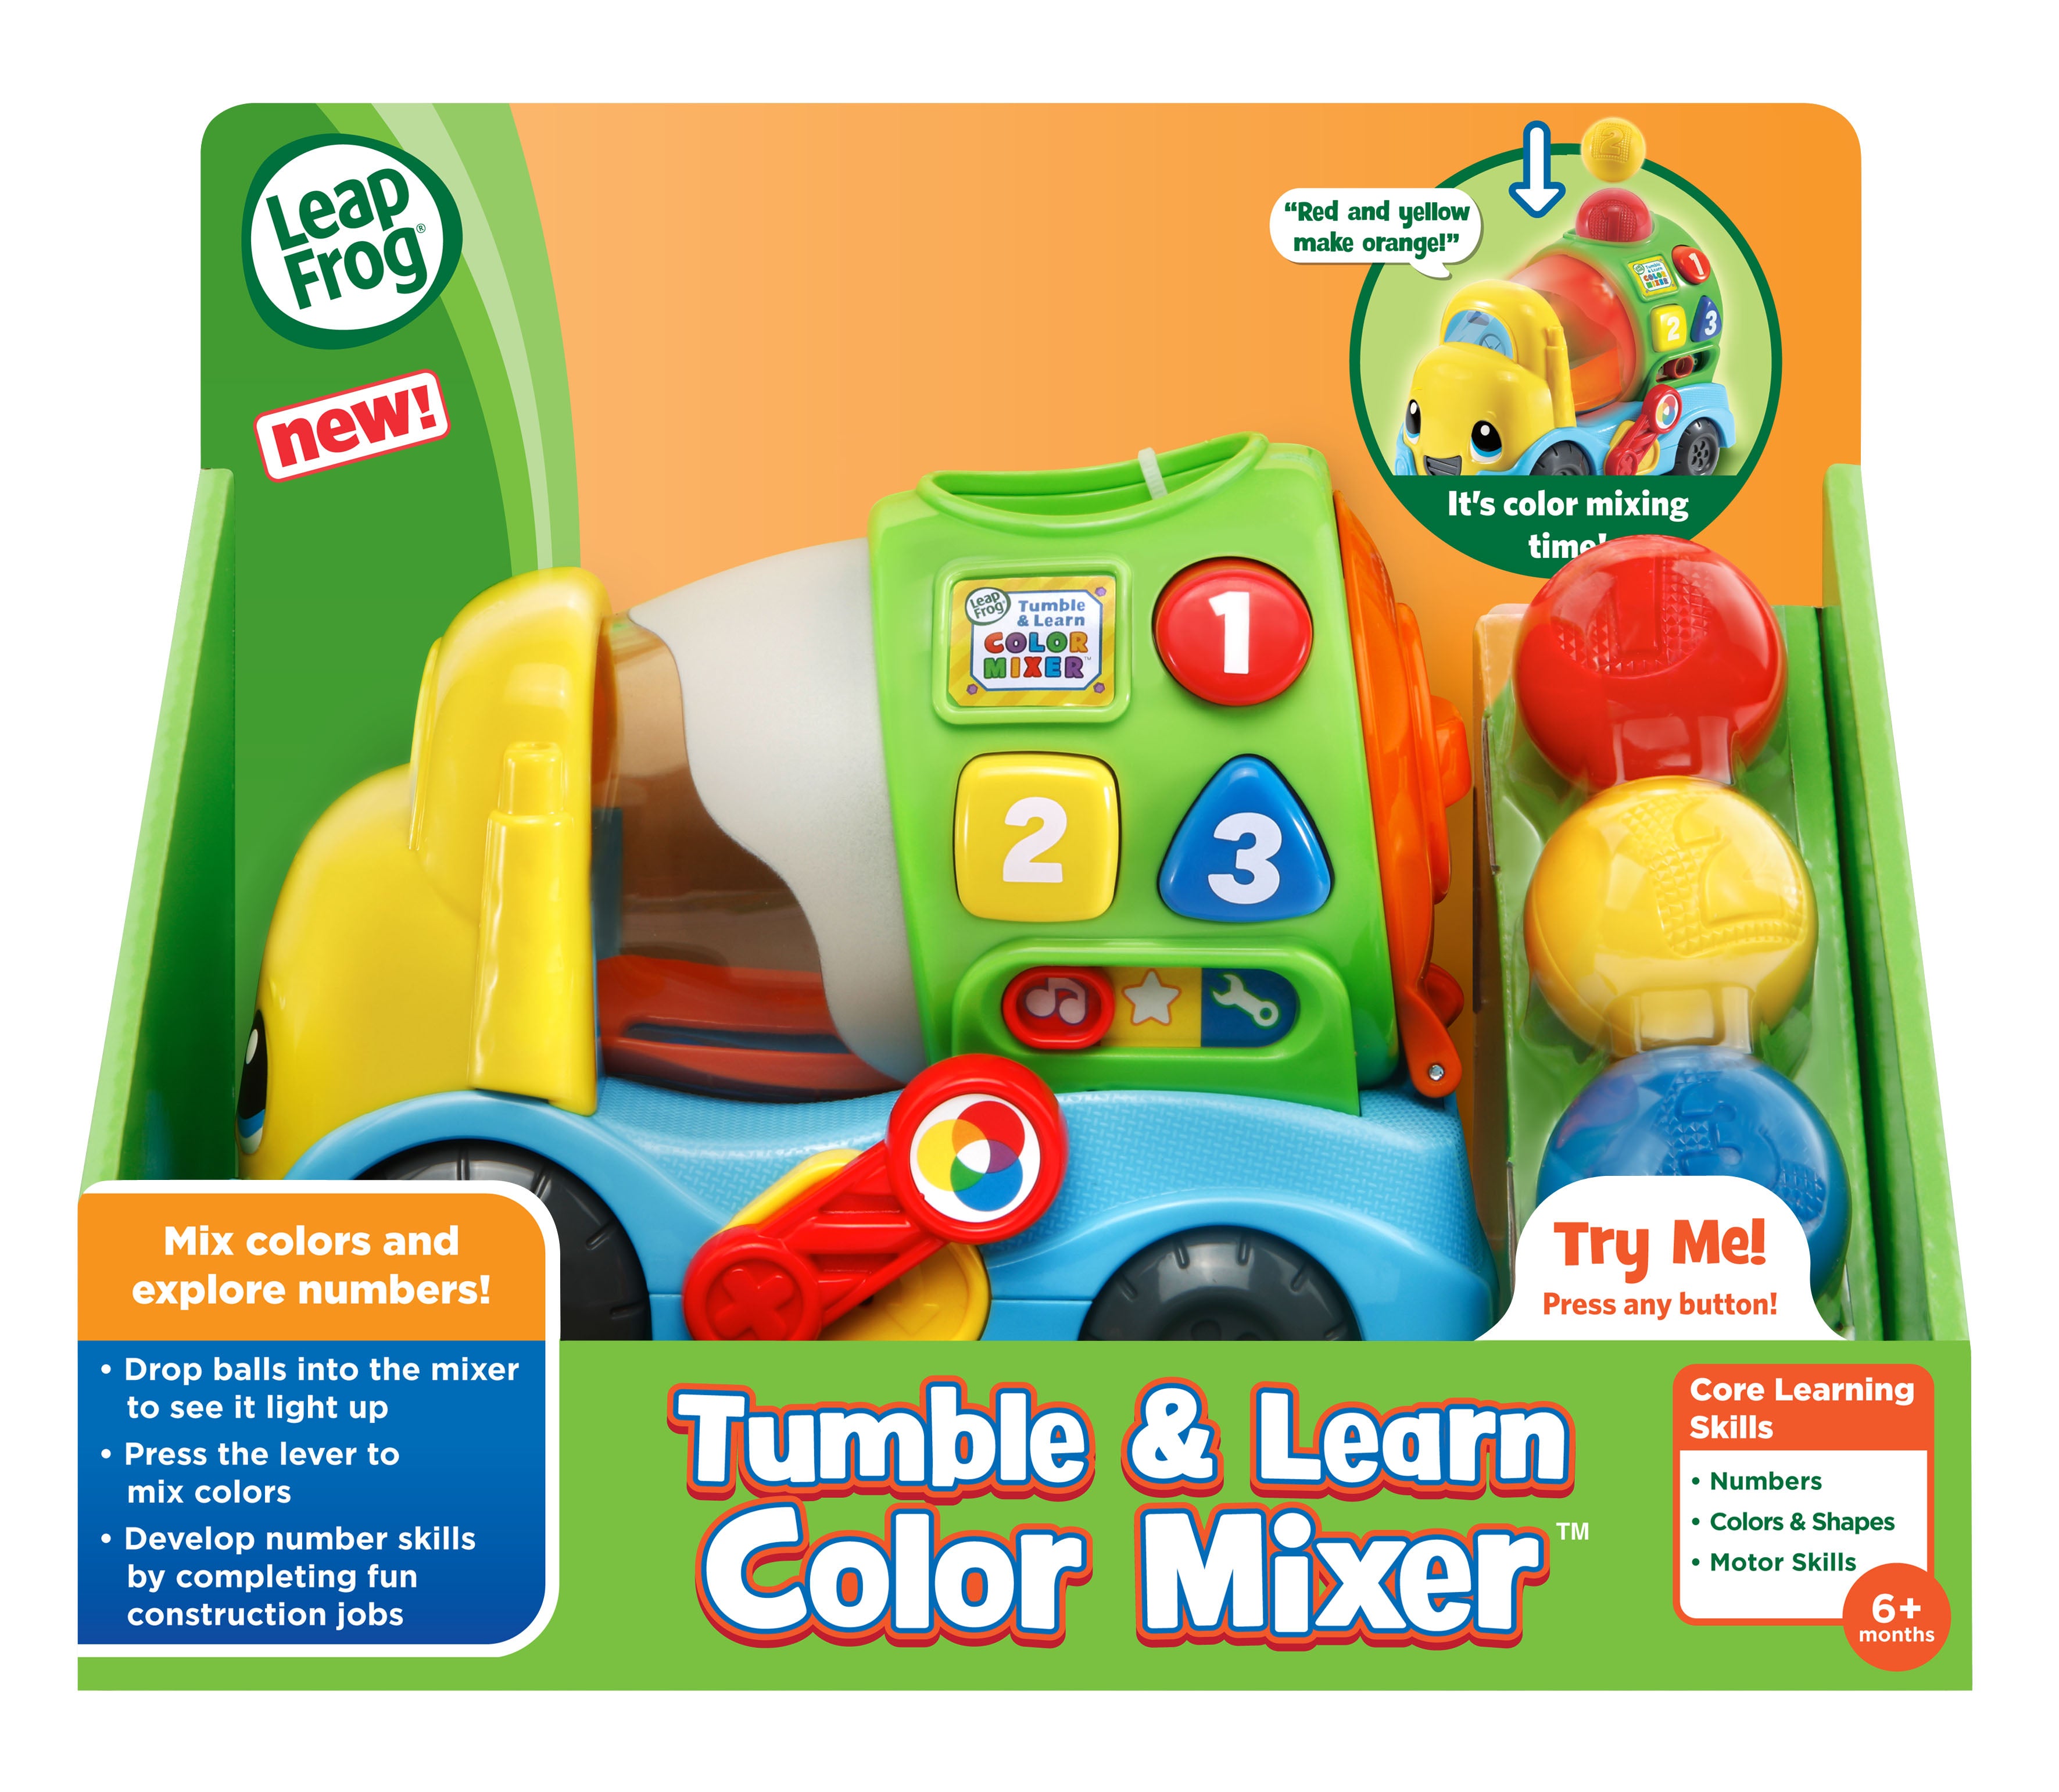 Leapfrog - Tumble And Learn Color Mixer